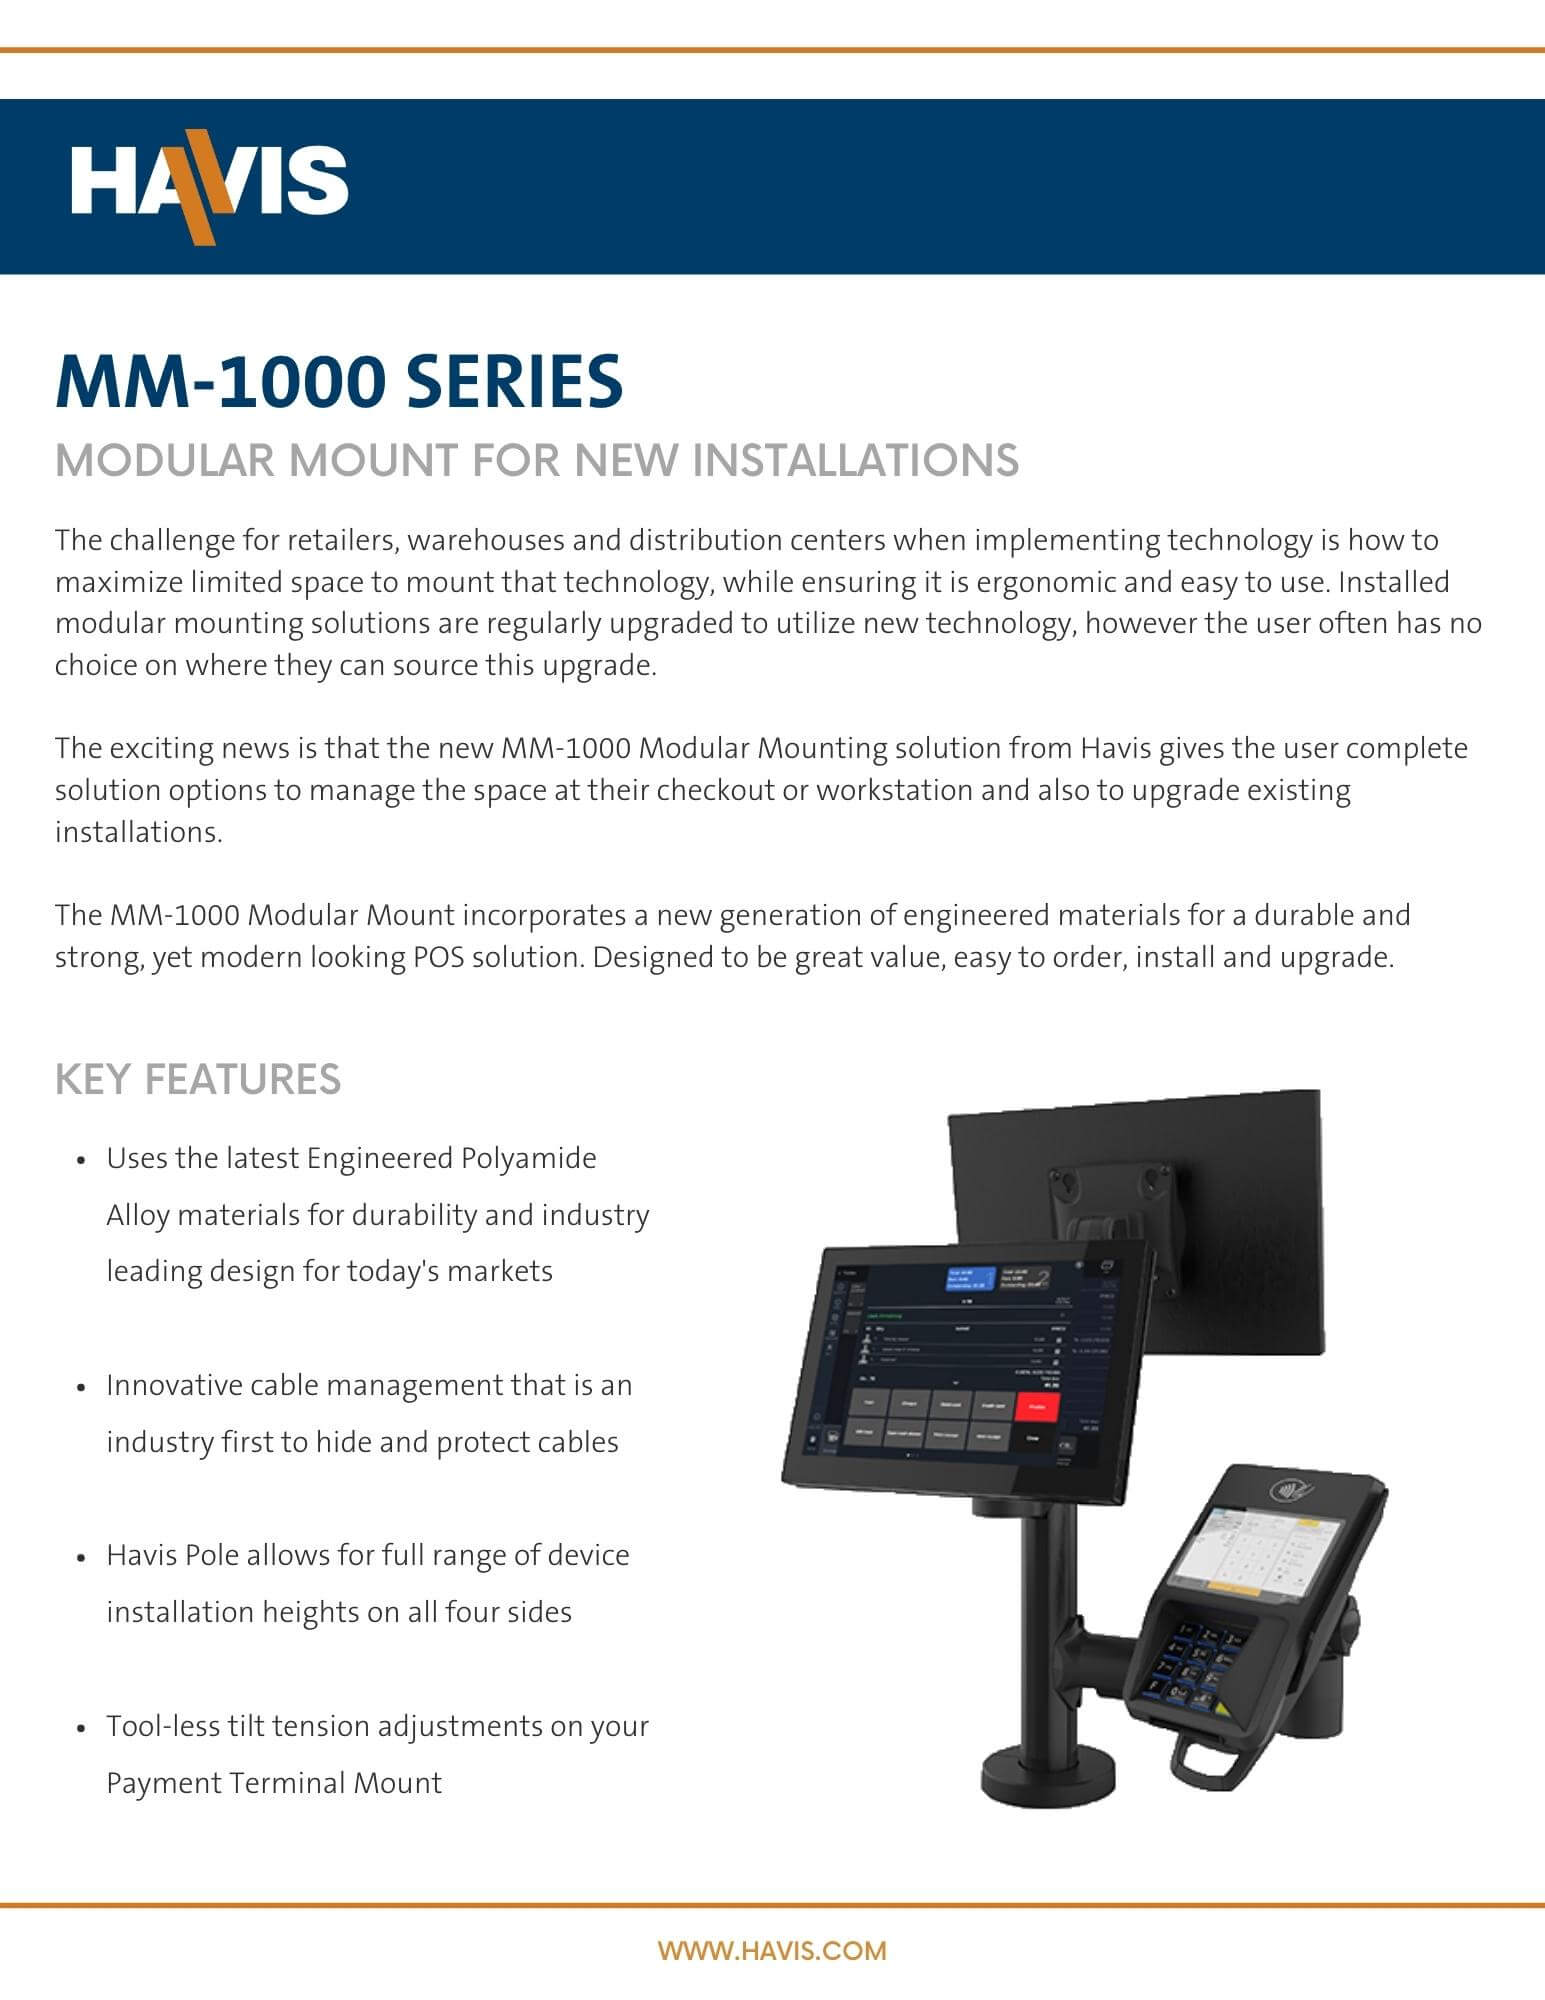 MM-1000 Series for New Installations Product Guide